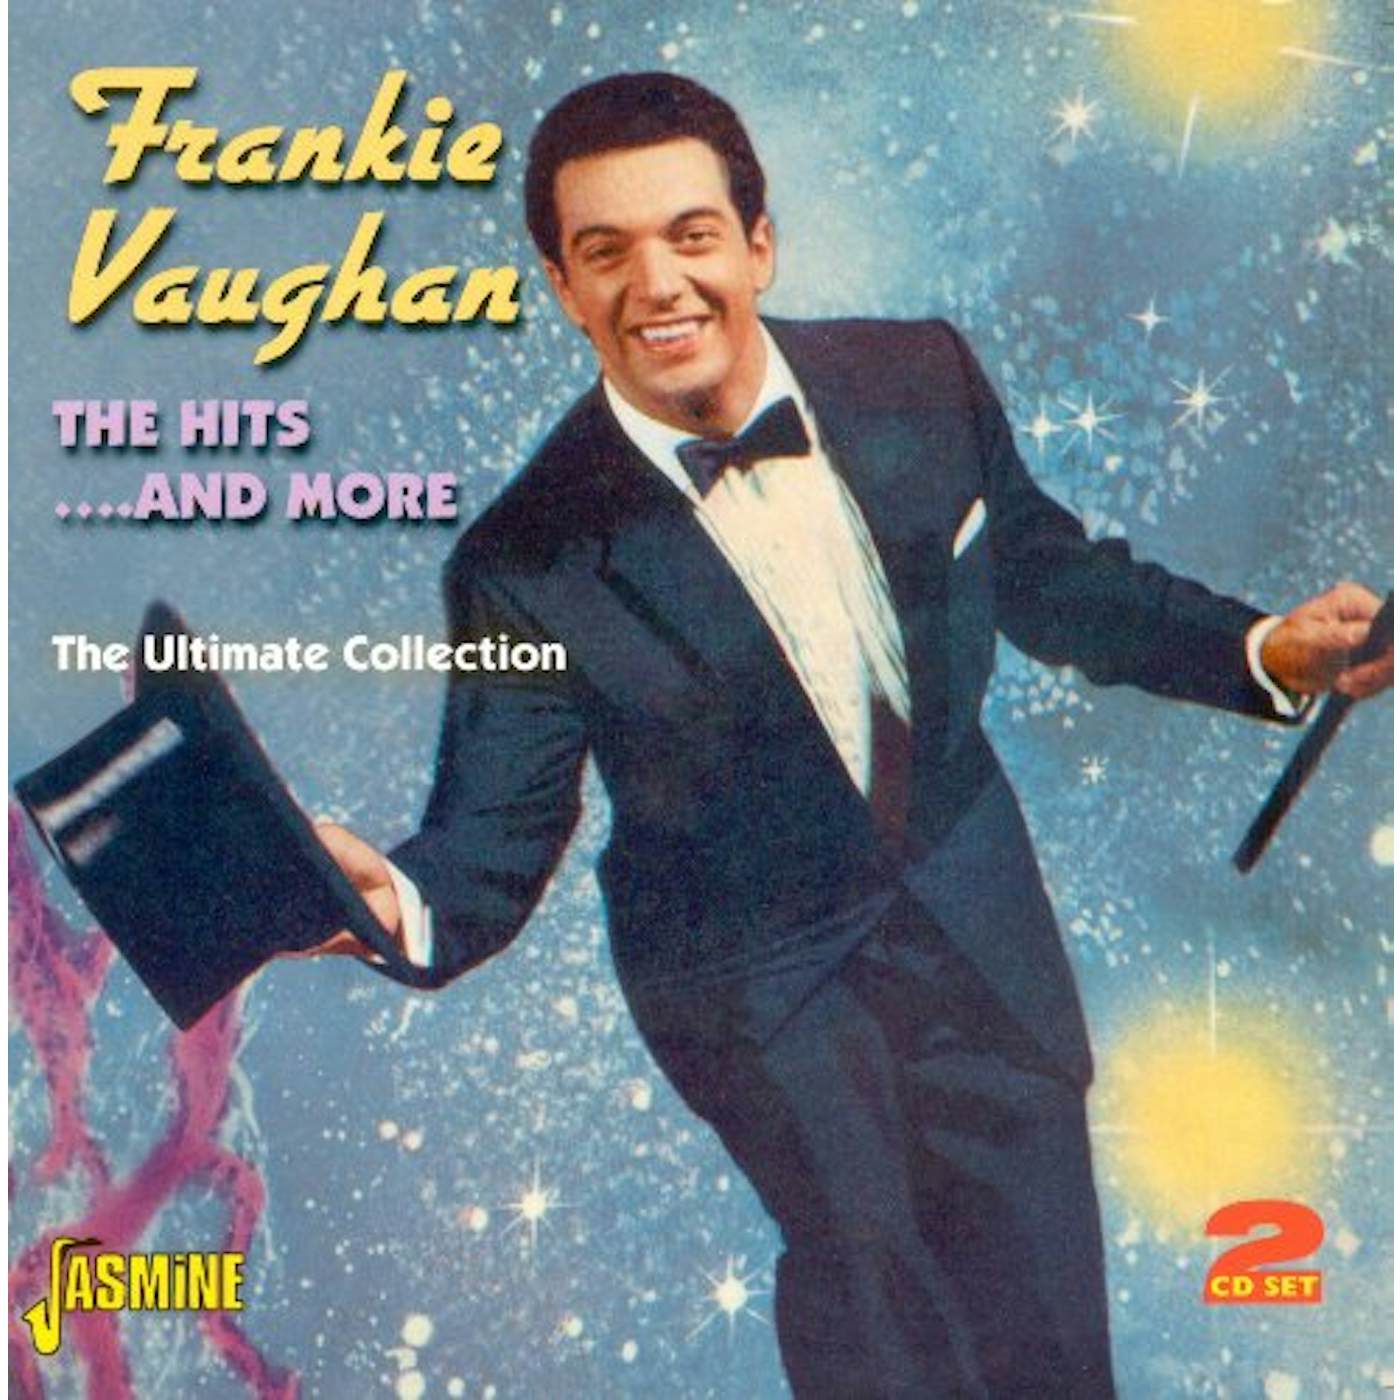 Frankie Vaughan ULTIMATE COLLECTION CD